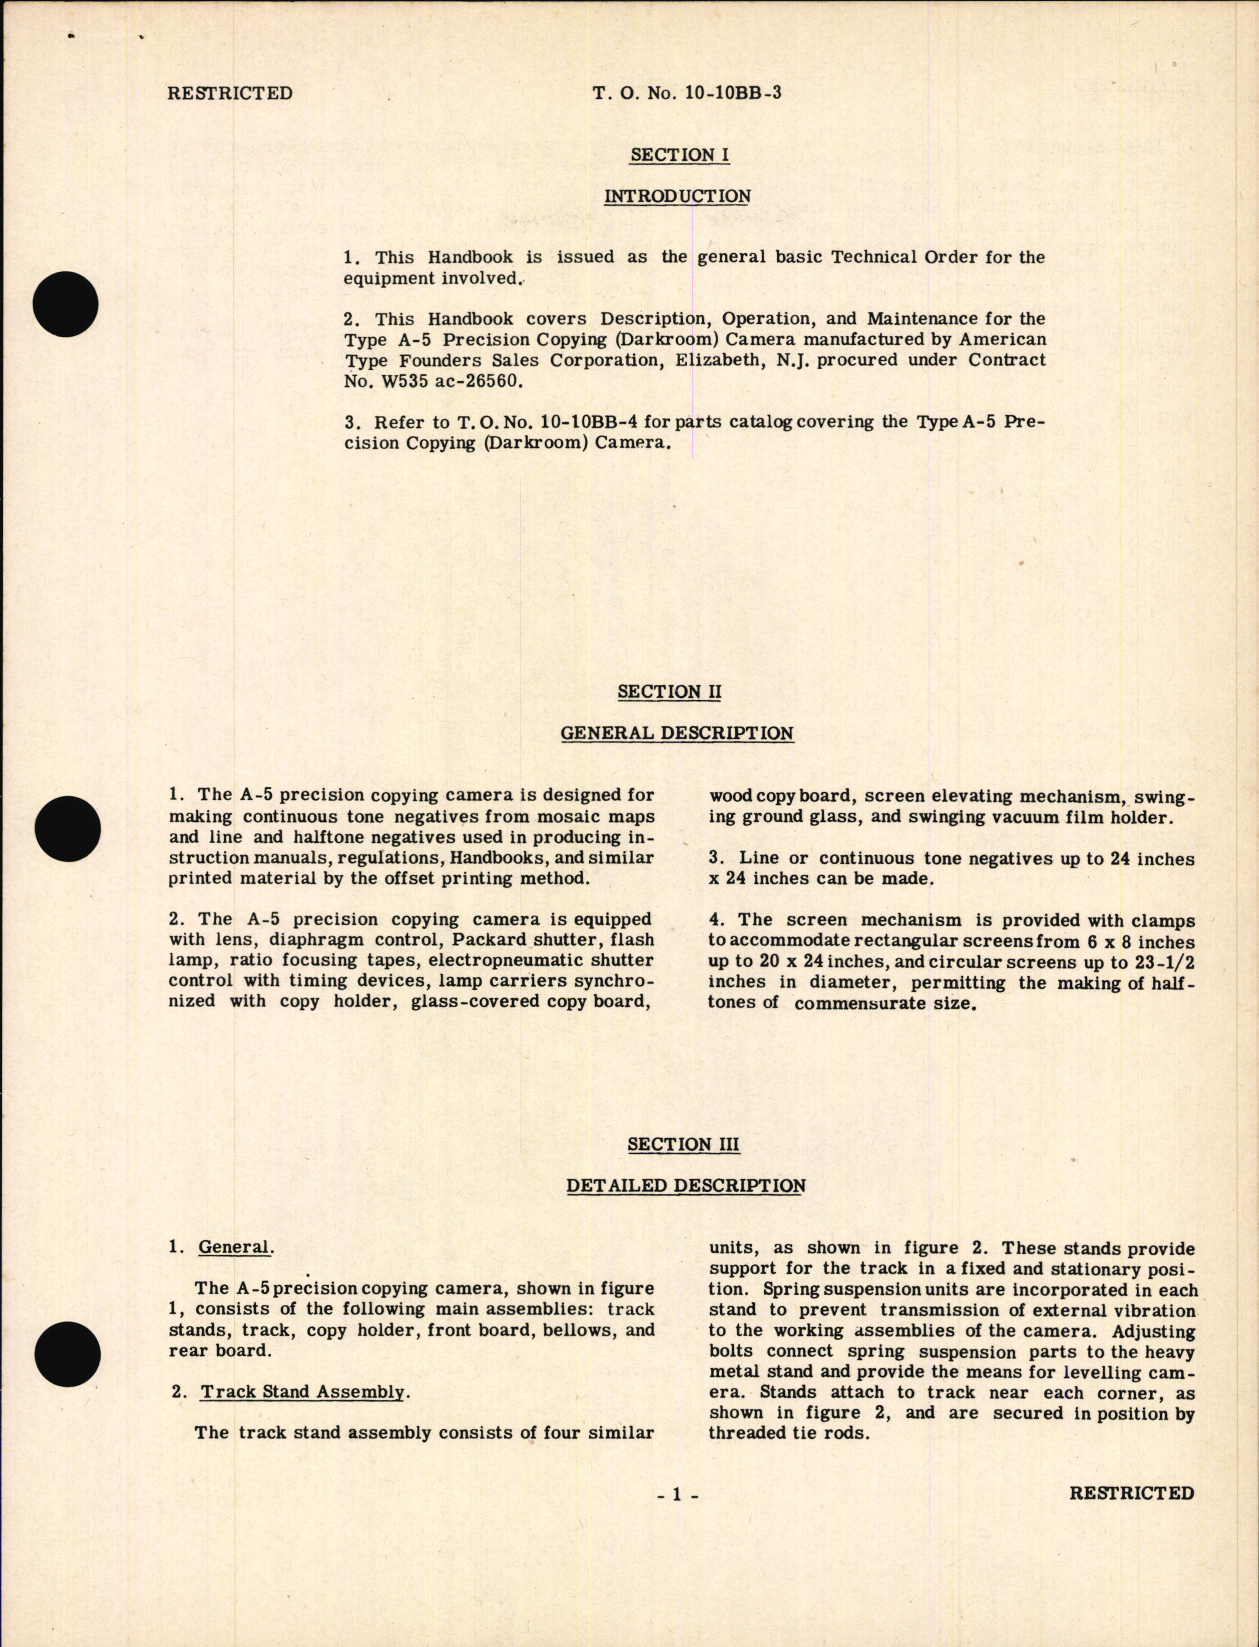 Sample page 7 from AirCorps Library document: Handbook of Instructions for Type A-5 Ground Copying Camera